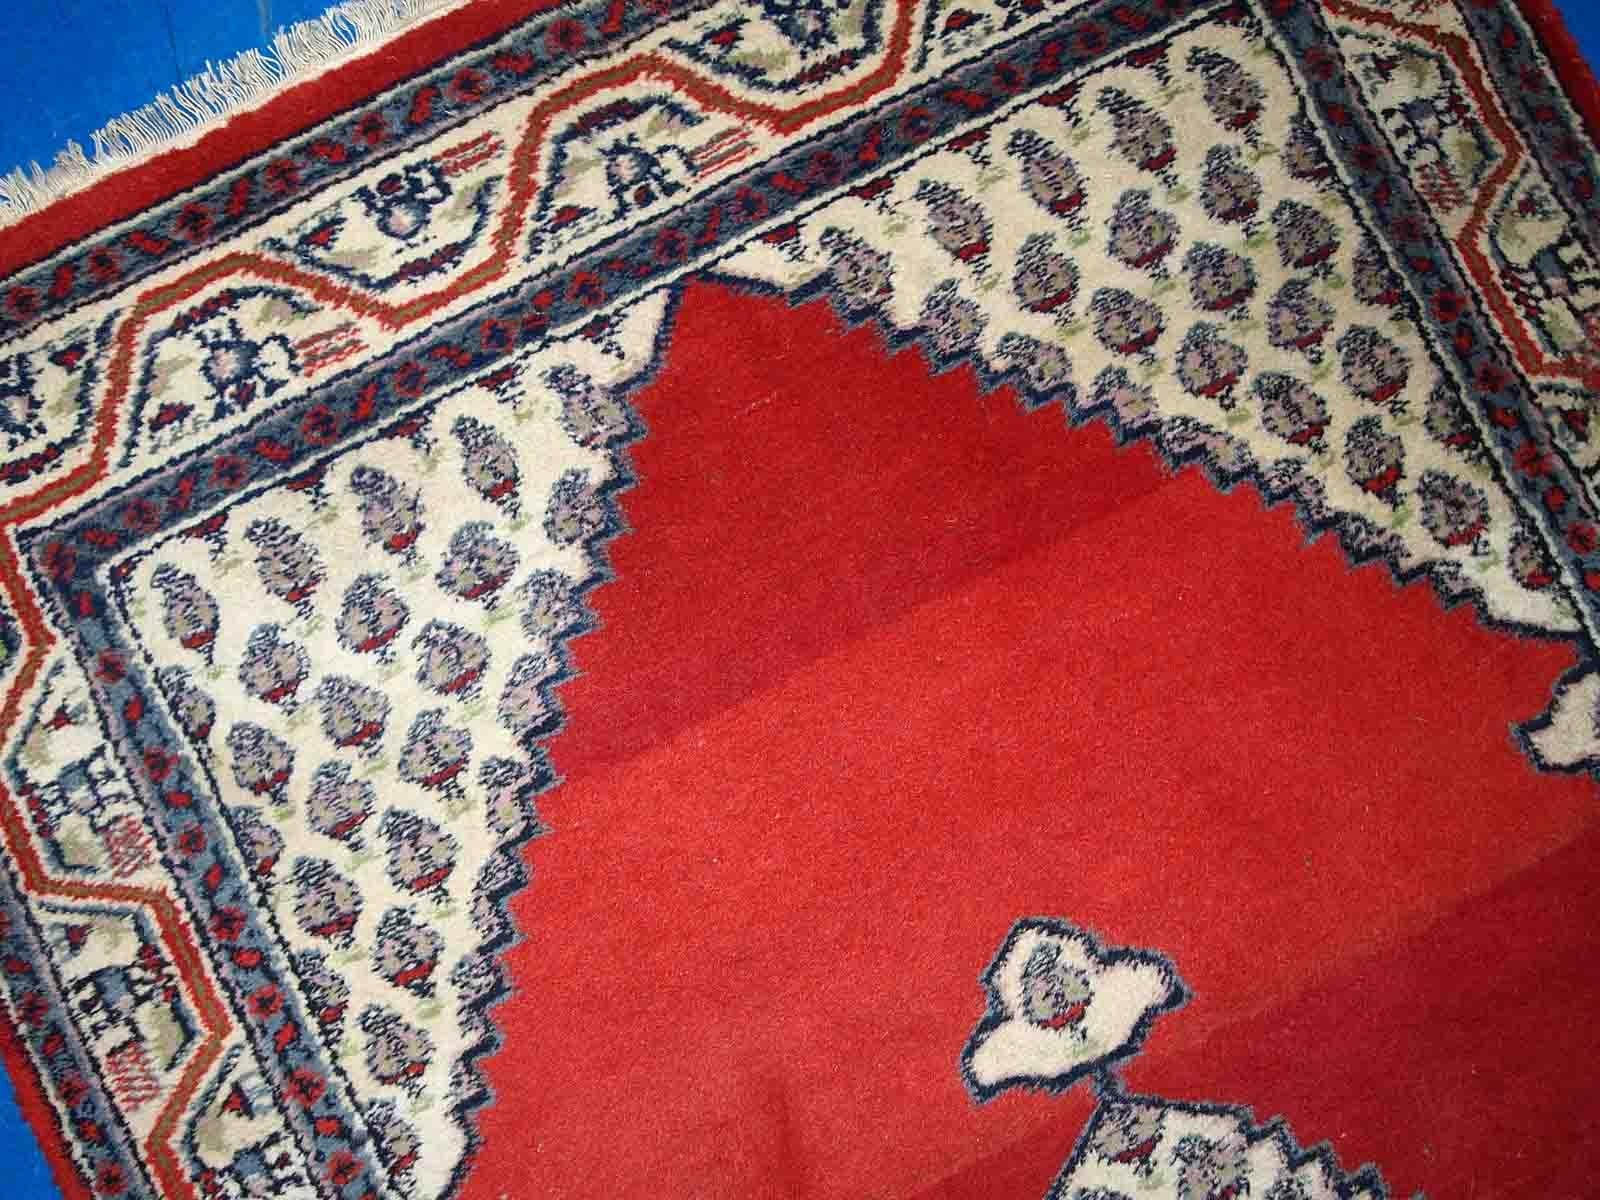 Vintage handmade Indian rug from the end of 20th century. The rug is in original good condition in red and beige wool.

-condition: original good,

-circa: 1970s,

-size: 2.9' x 5.3' (91cm x 163cm),

-material: wool,

-country of origin: